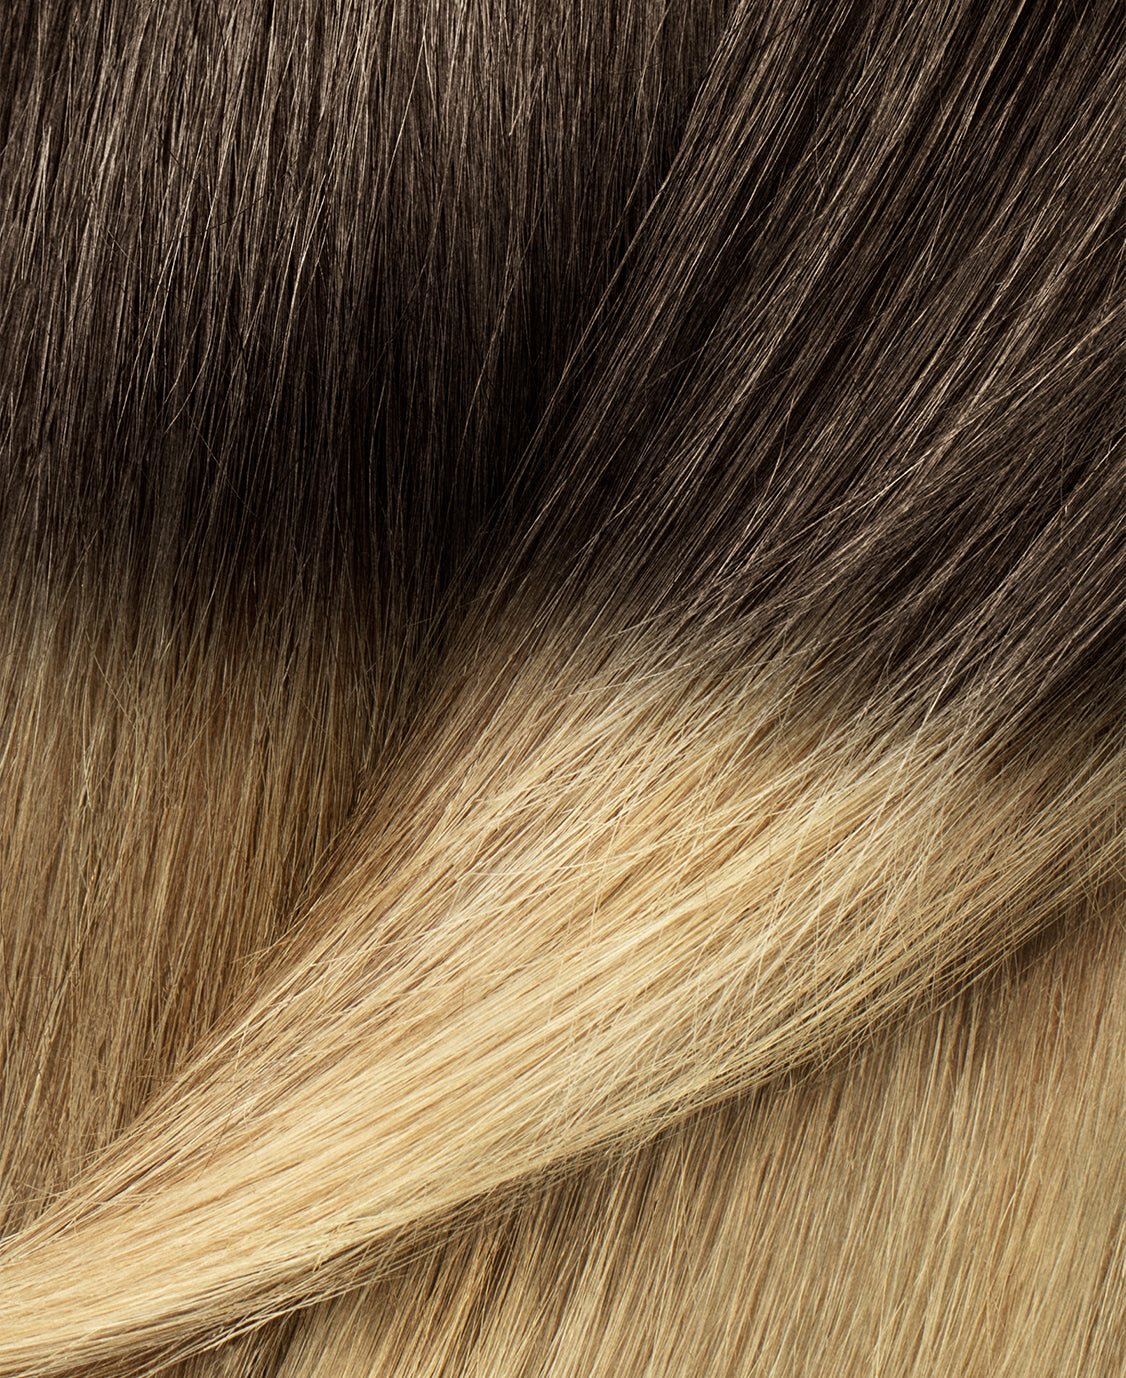 Hair, Brown, Wood, Natural material, Tints and shades, Pattern, Rectangle, Feather, Electric blue, Fur